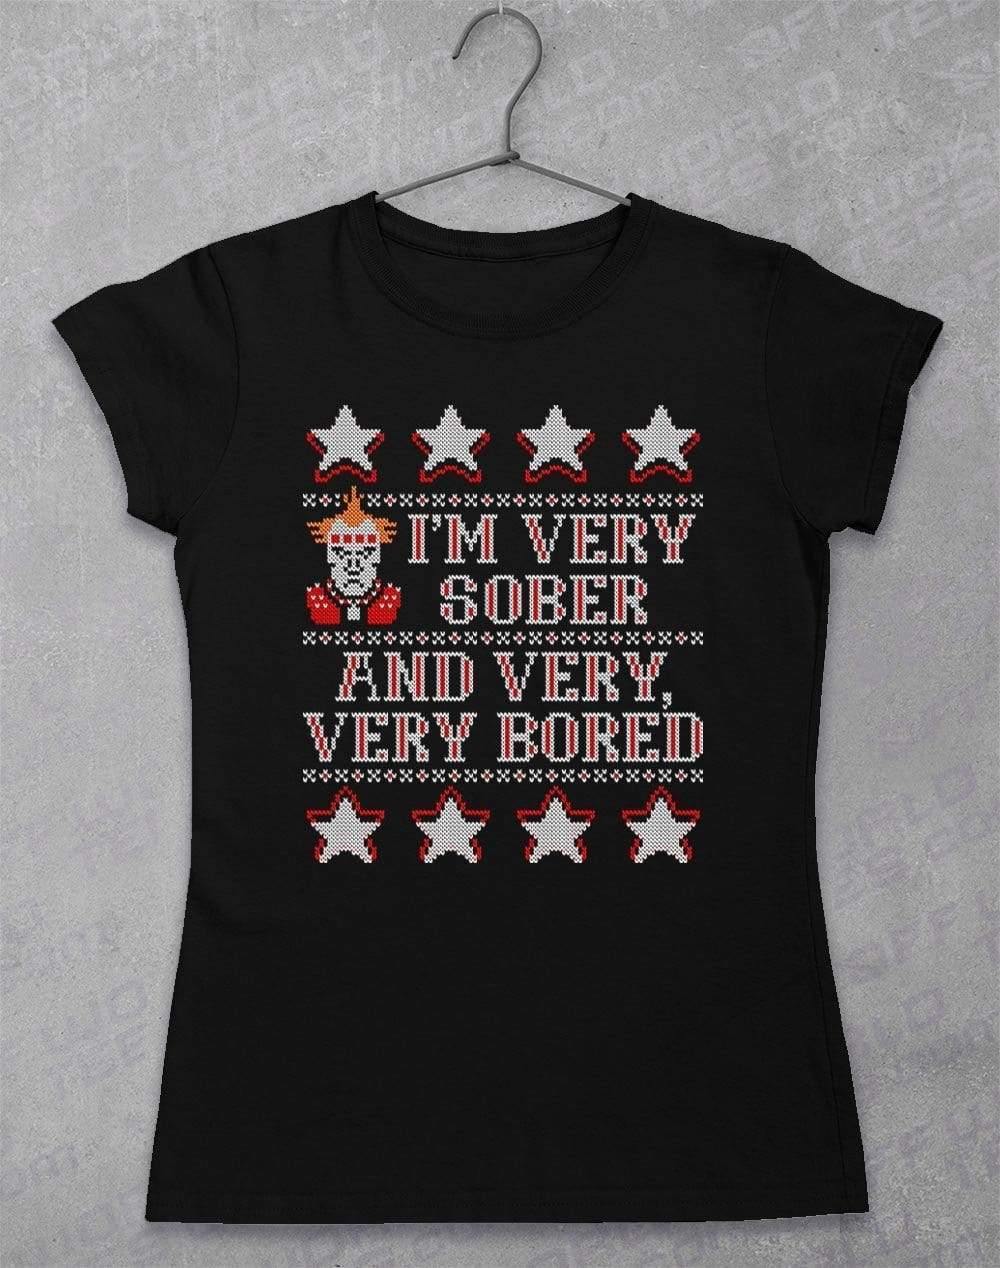 I'm Very Sober and Very Very Bored Festive Knitted-Look Women's T-Shirt 8-10 / Black  - Off World Tees